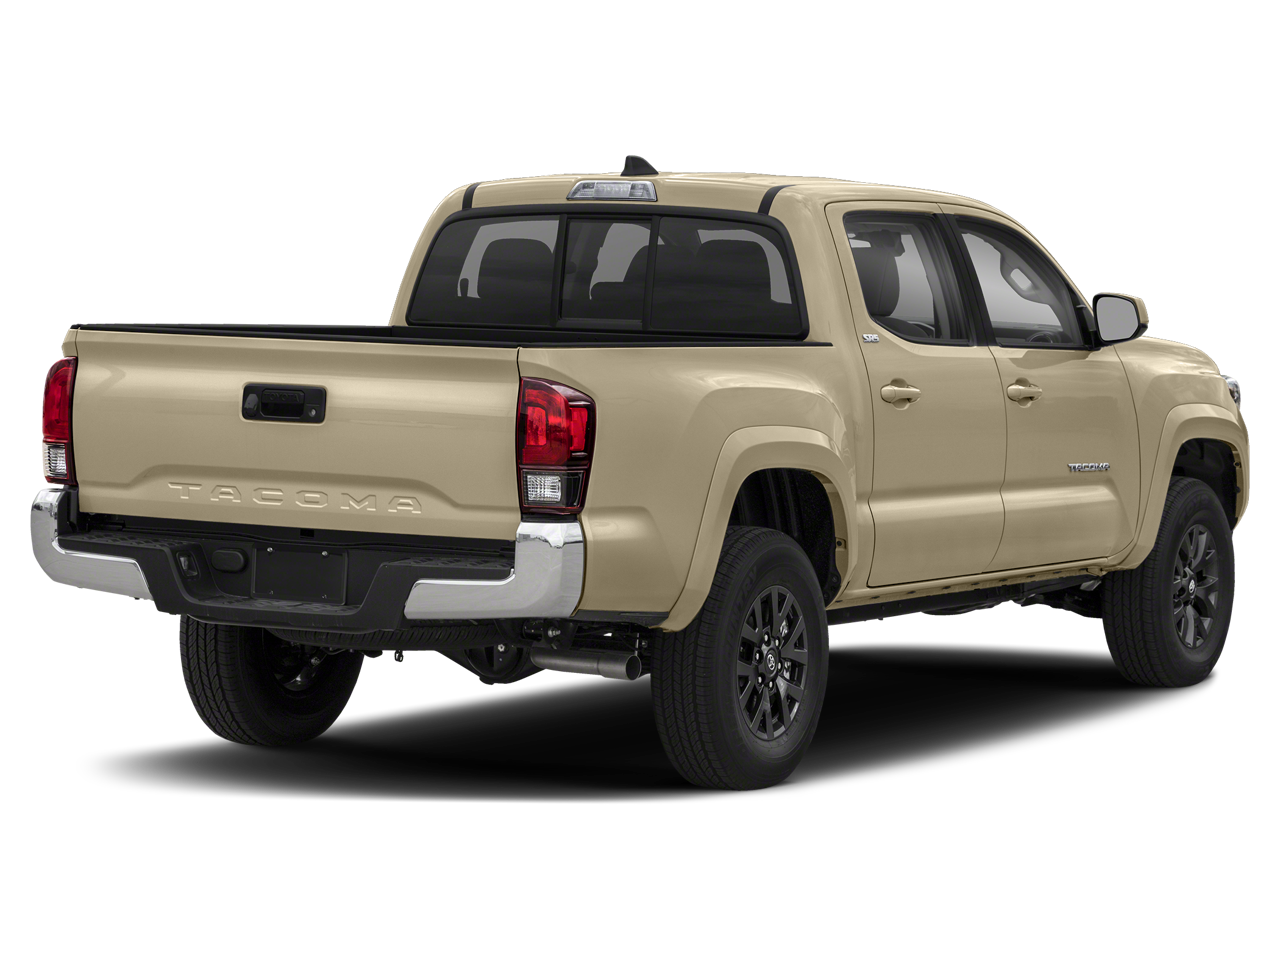 Used 2020 Toyota Tacoma TRD Offroad with VIN 5TFCZ5AN6LX212651 for sale in Golden Valley, Minnesota